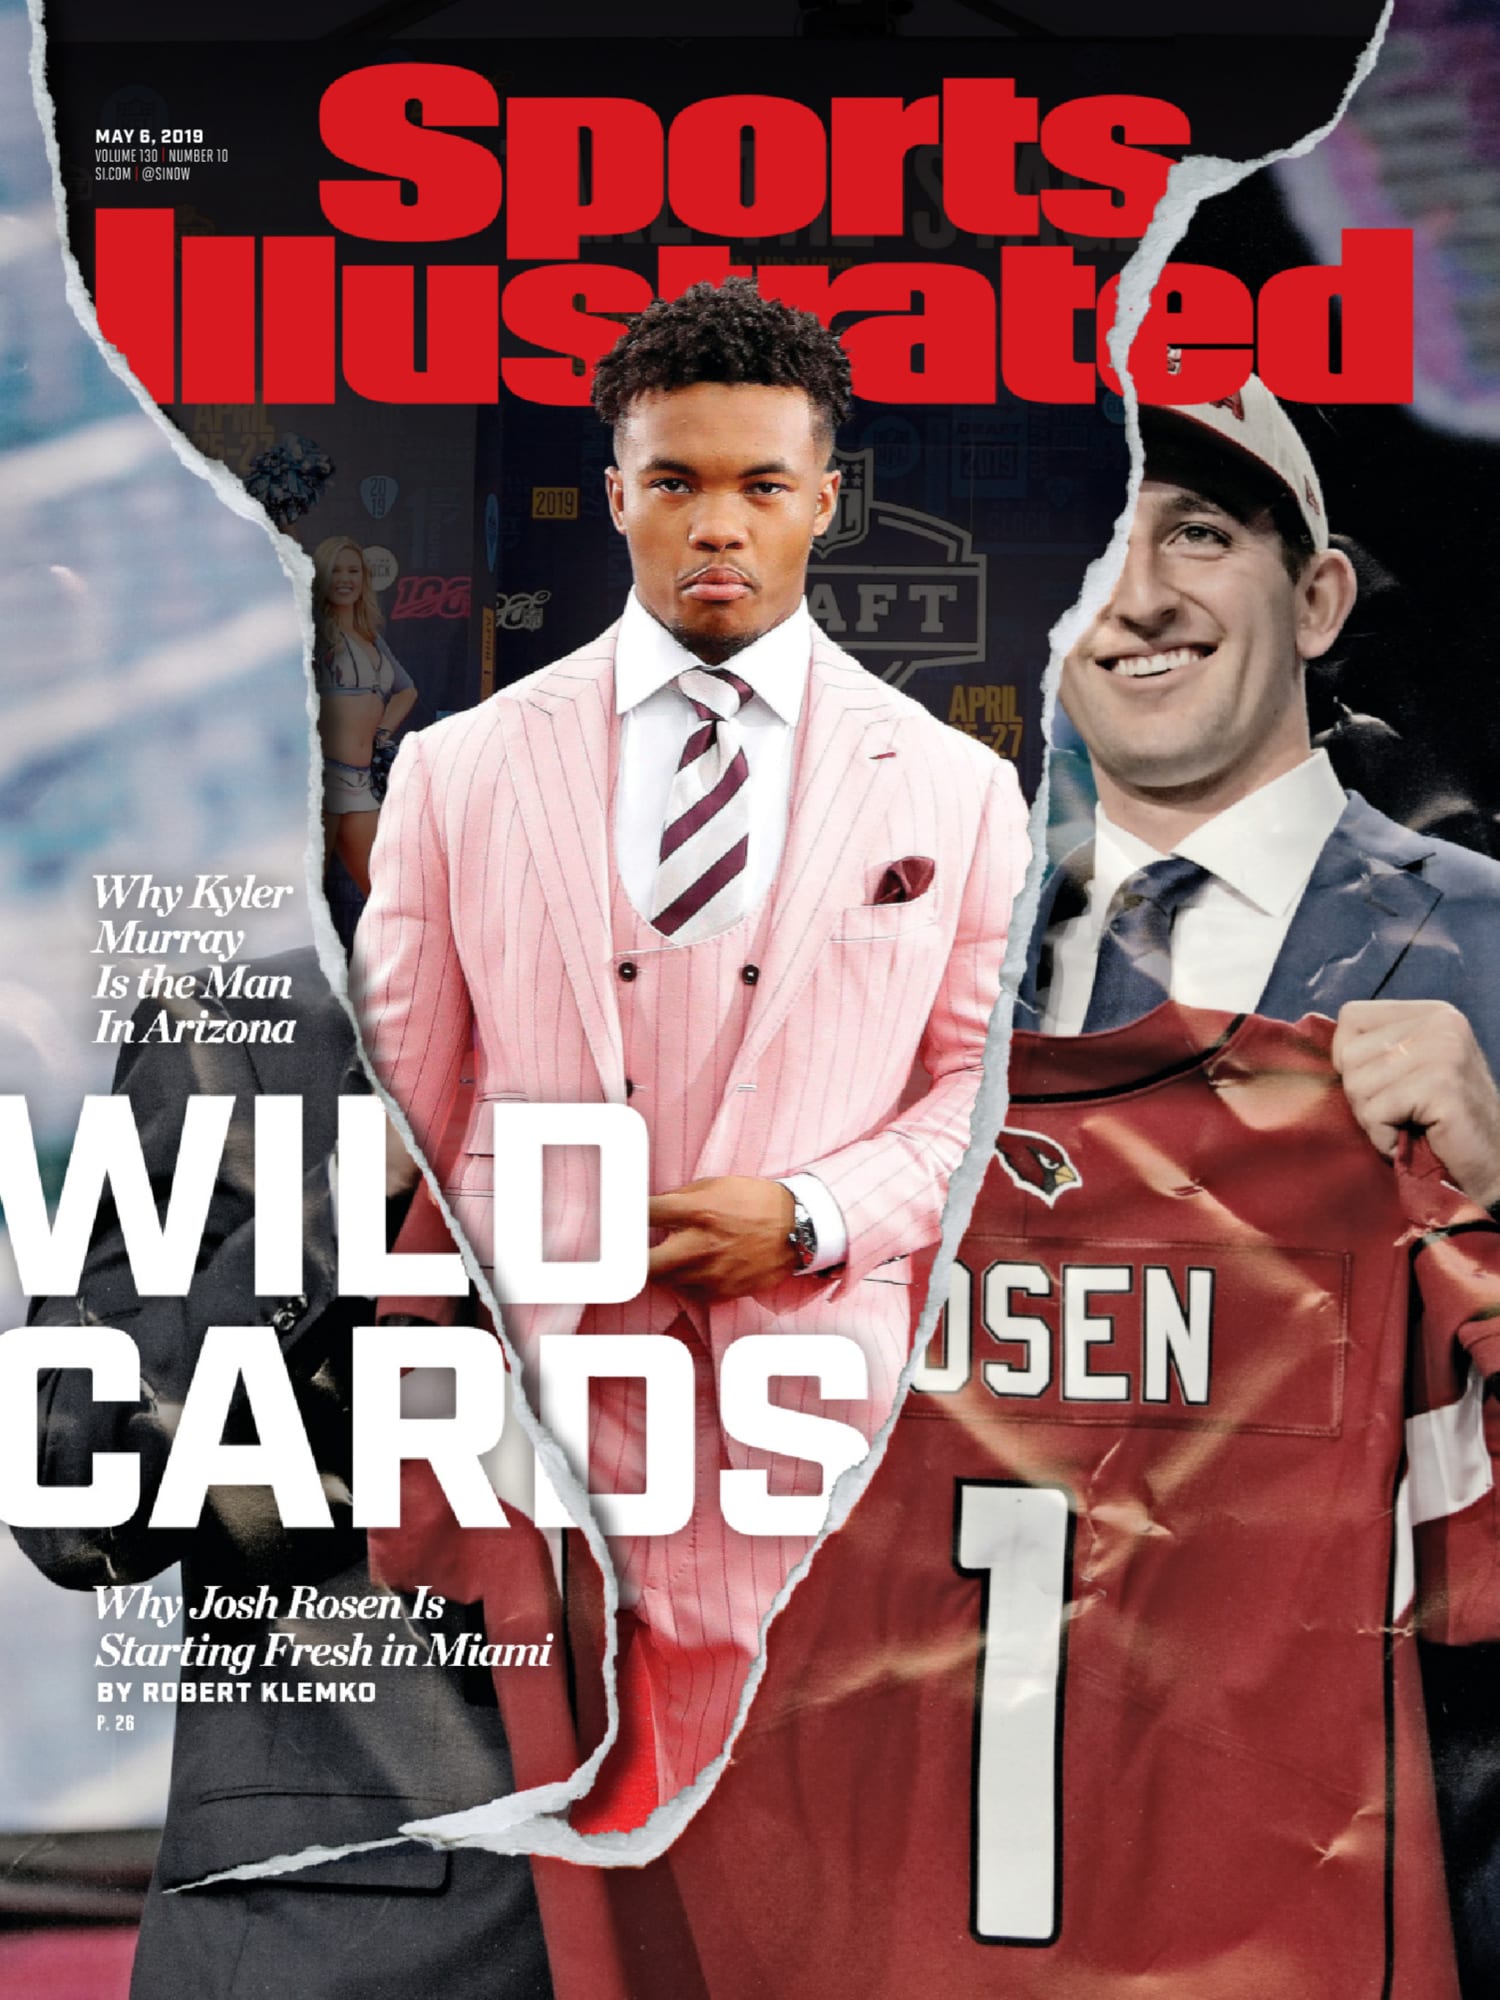 kyler-murray-2018-sports-illustrated-cover